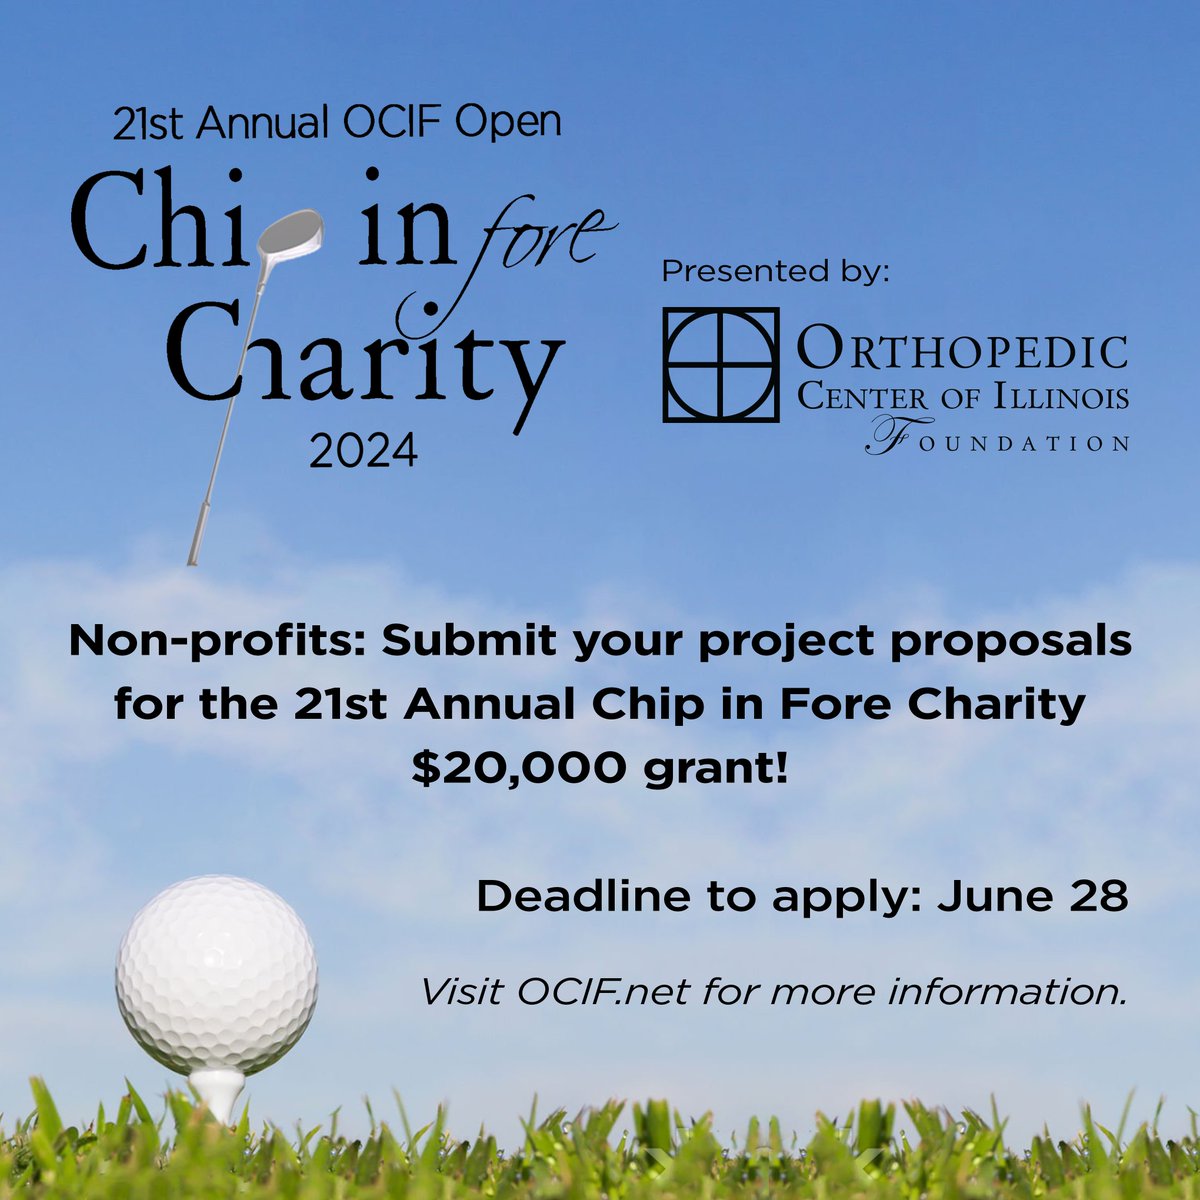 The $20,000 OCIF Chip in Fore Charity Grant Application is now live! Visit ocif.net to apply today.